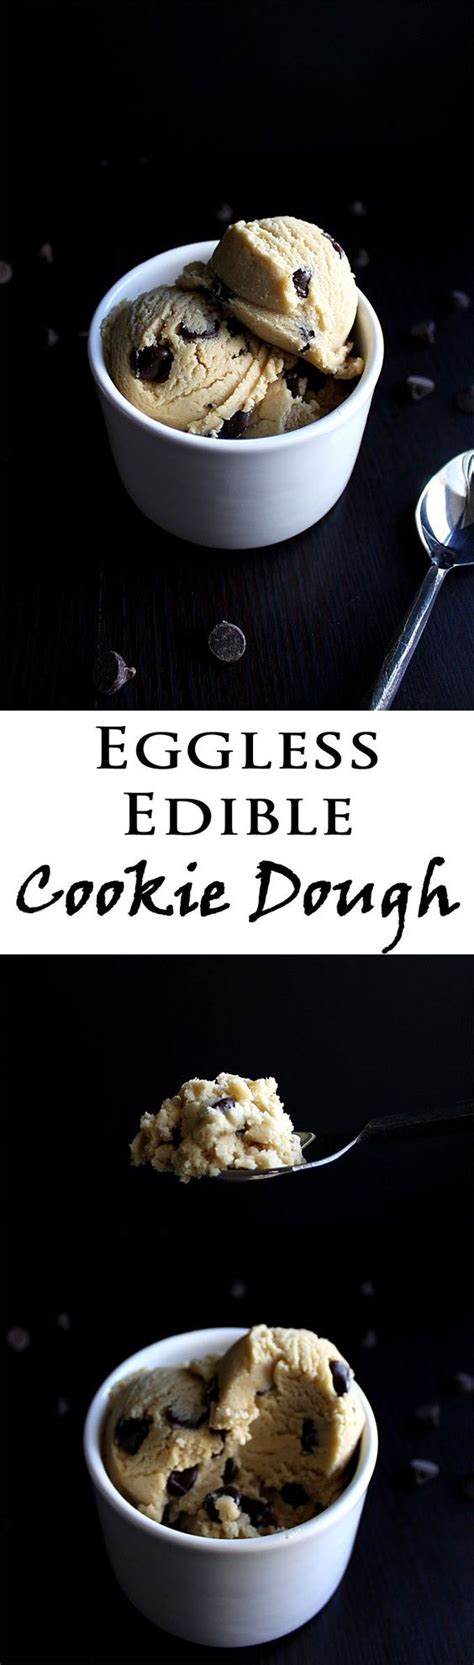 My recipe is still a sweet treat for kids and adults alike even though it's almost sugar free. Eggless Edible Cookie Dough with Chocolate Chips | Recipe | Cookie dough